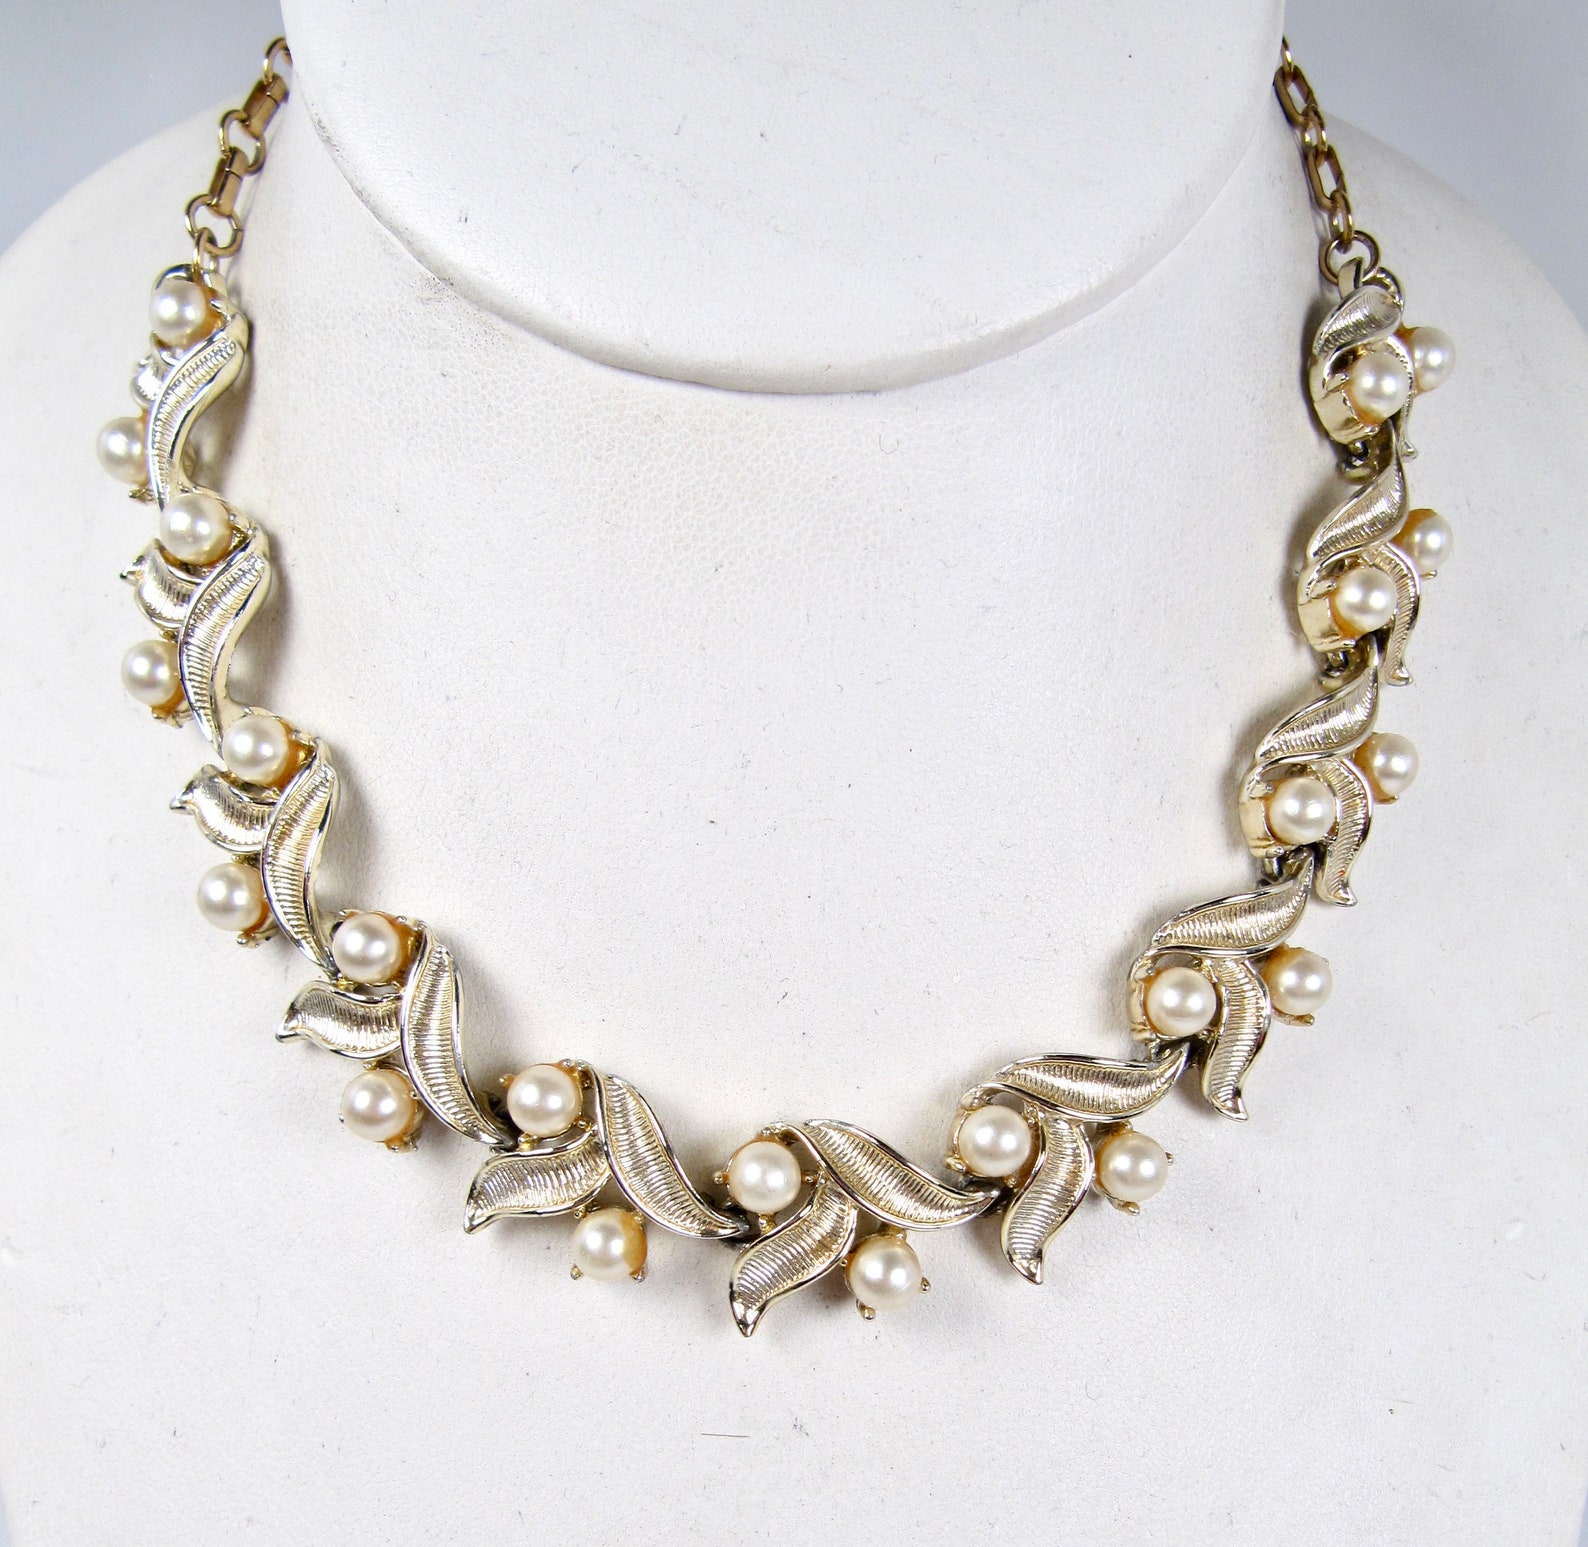 Vintage Coro Pearl & Leaf Choker Gold Tone Necklace 1950s - Etsy